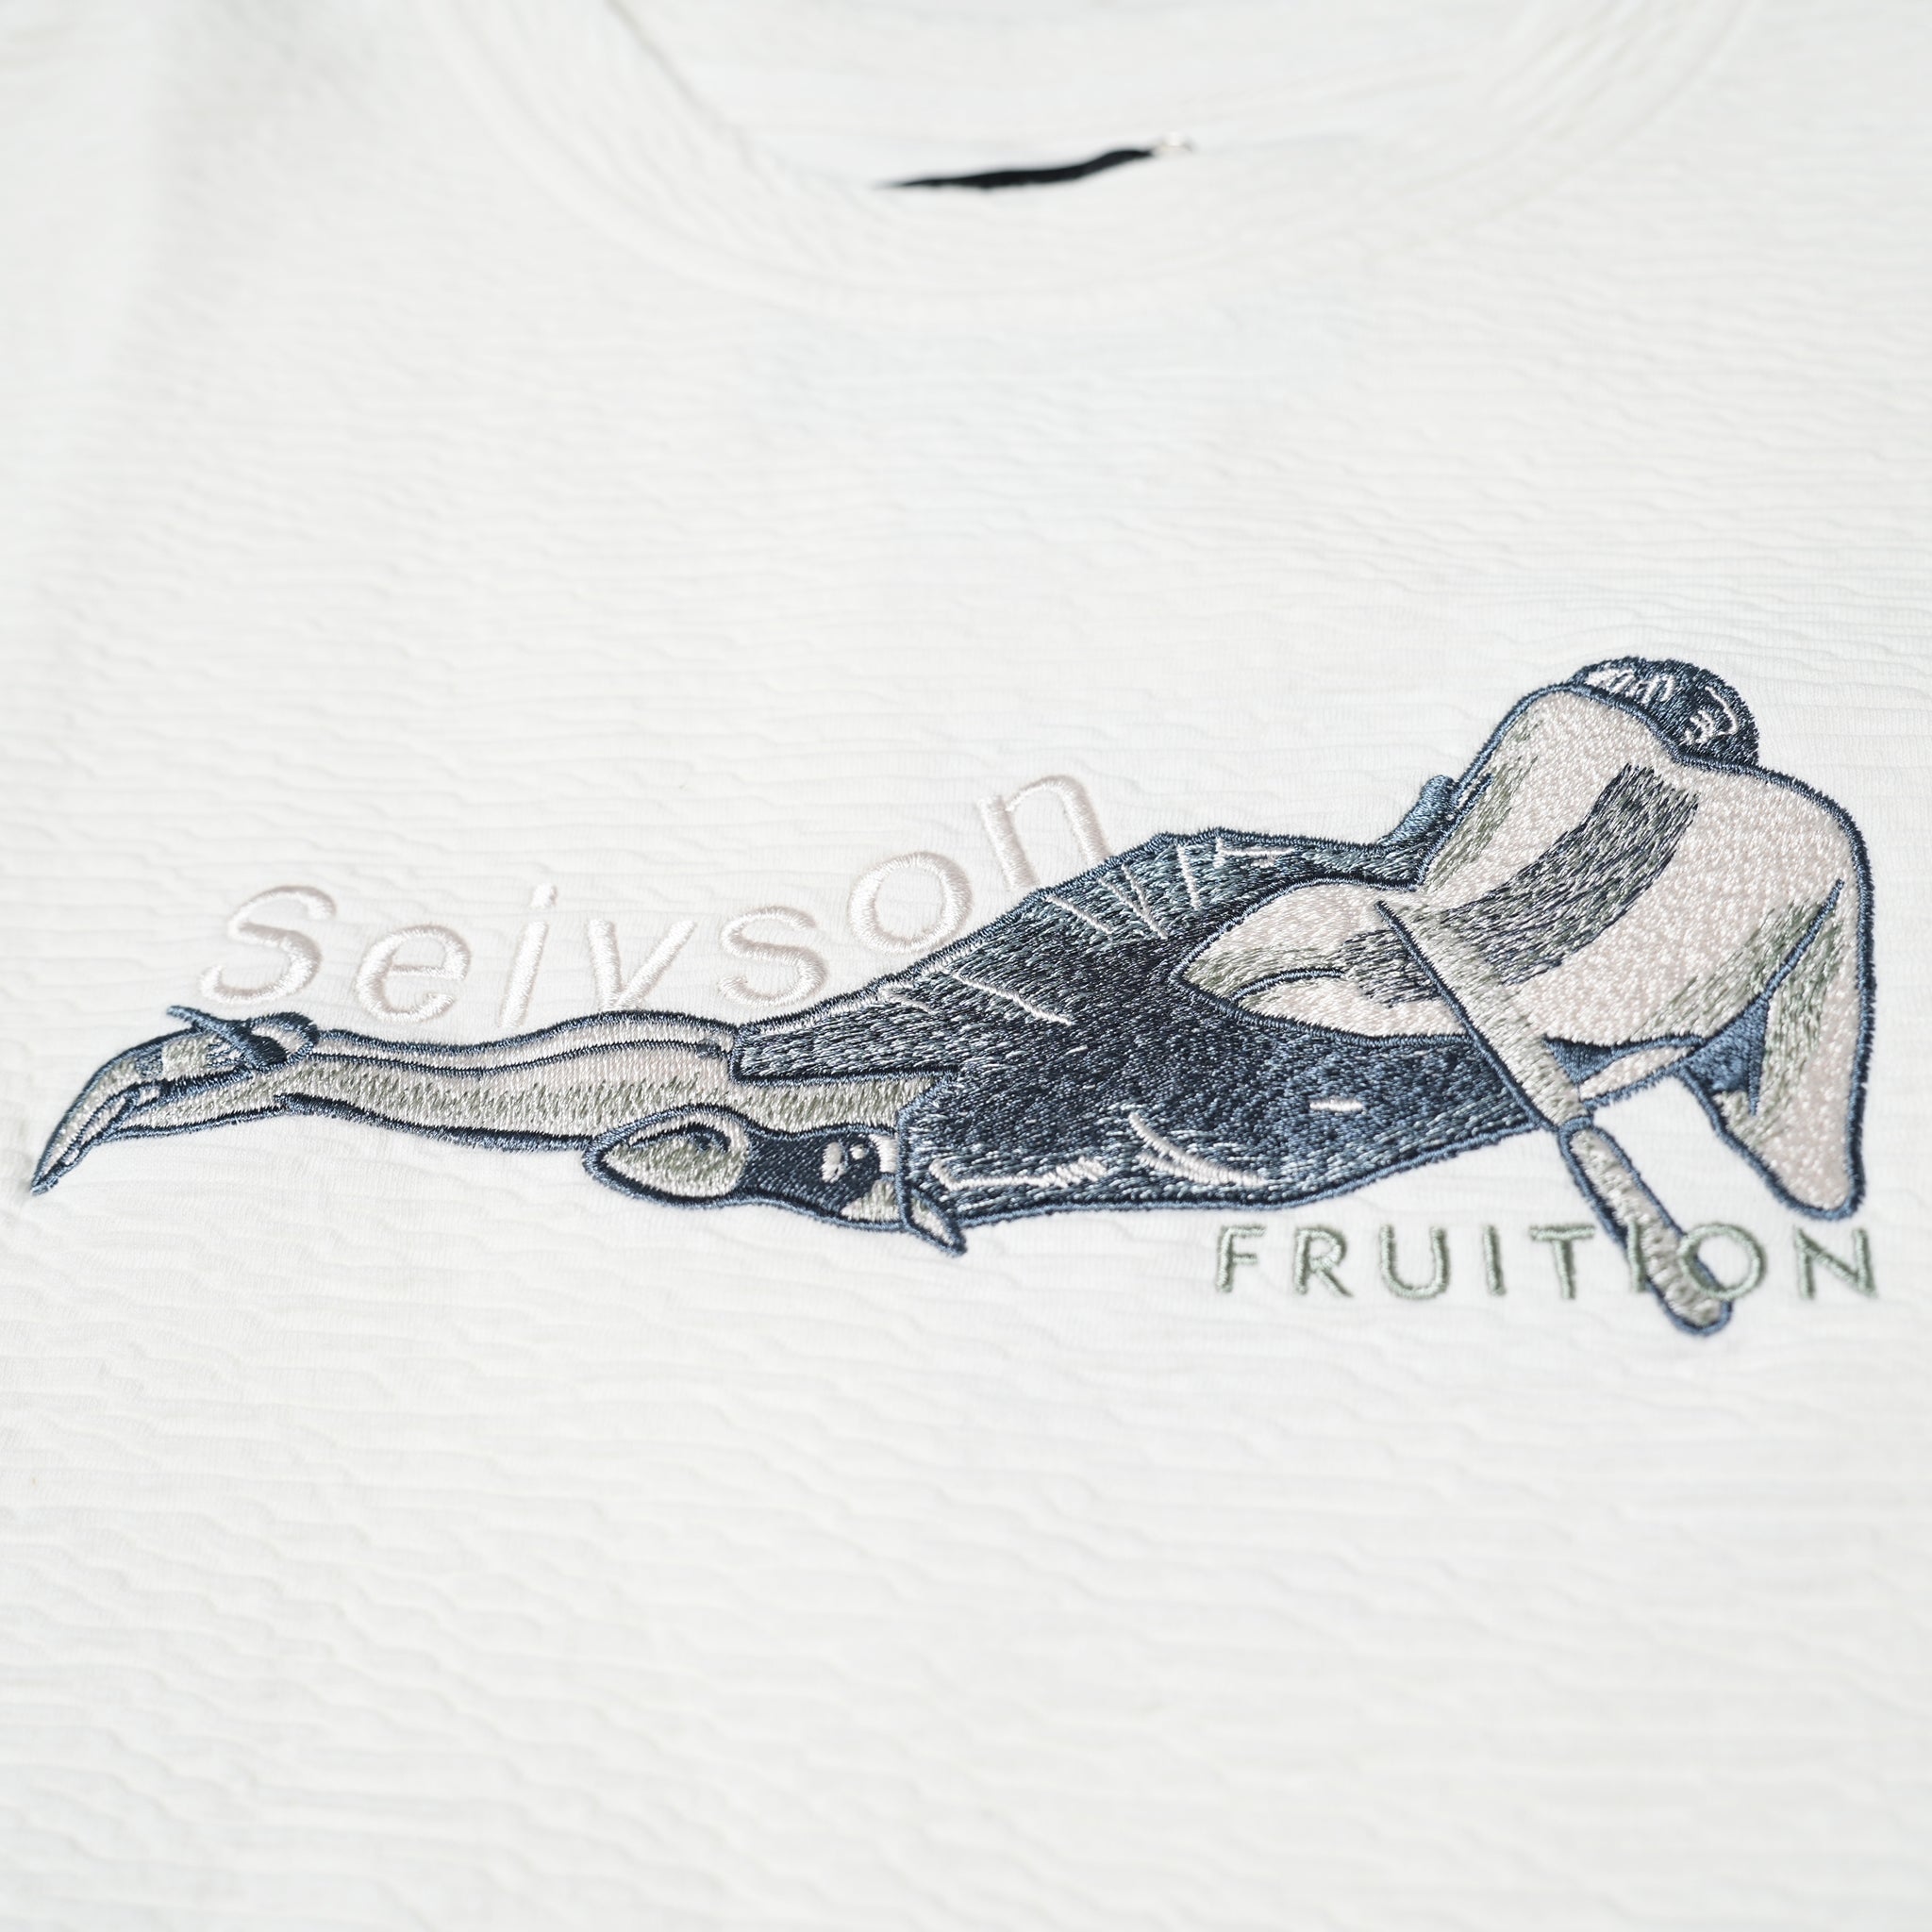 No:Seivson tee | Name:Seivson x FRUITION "Hand Embroidered Goddess of Harvest Demeter T-SHIRT" White【SEIVSON_セイブソン】